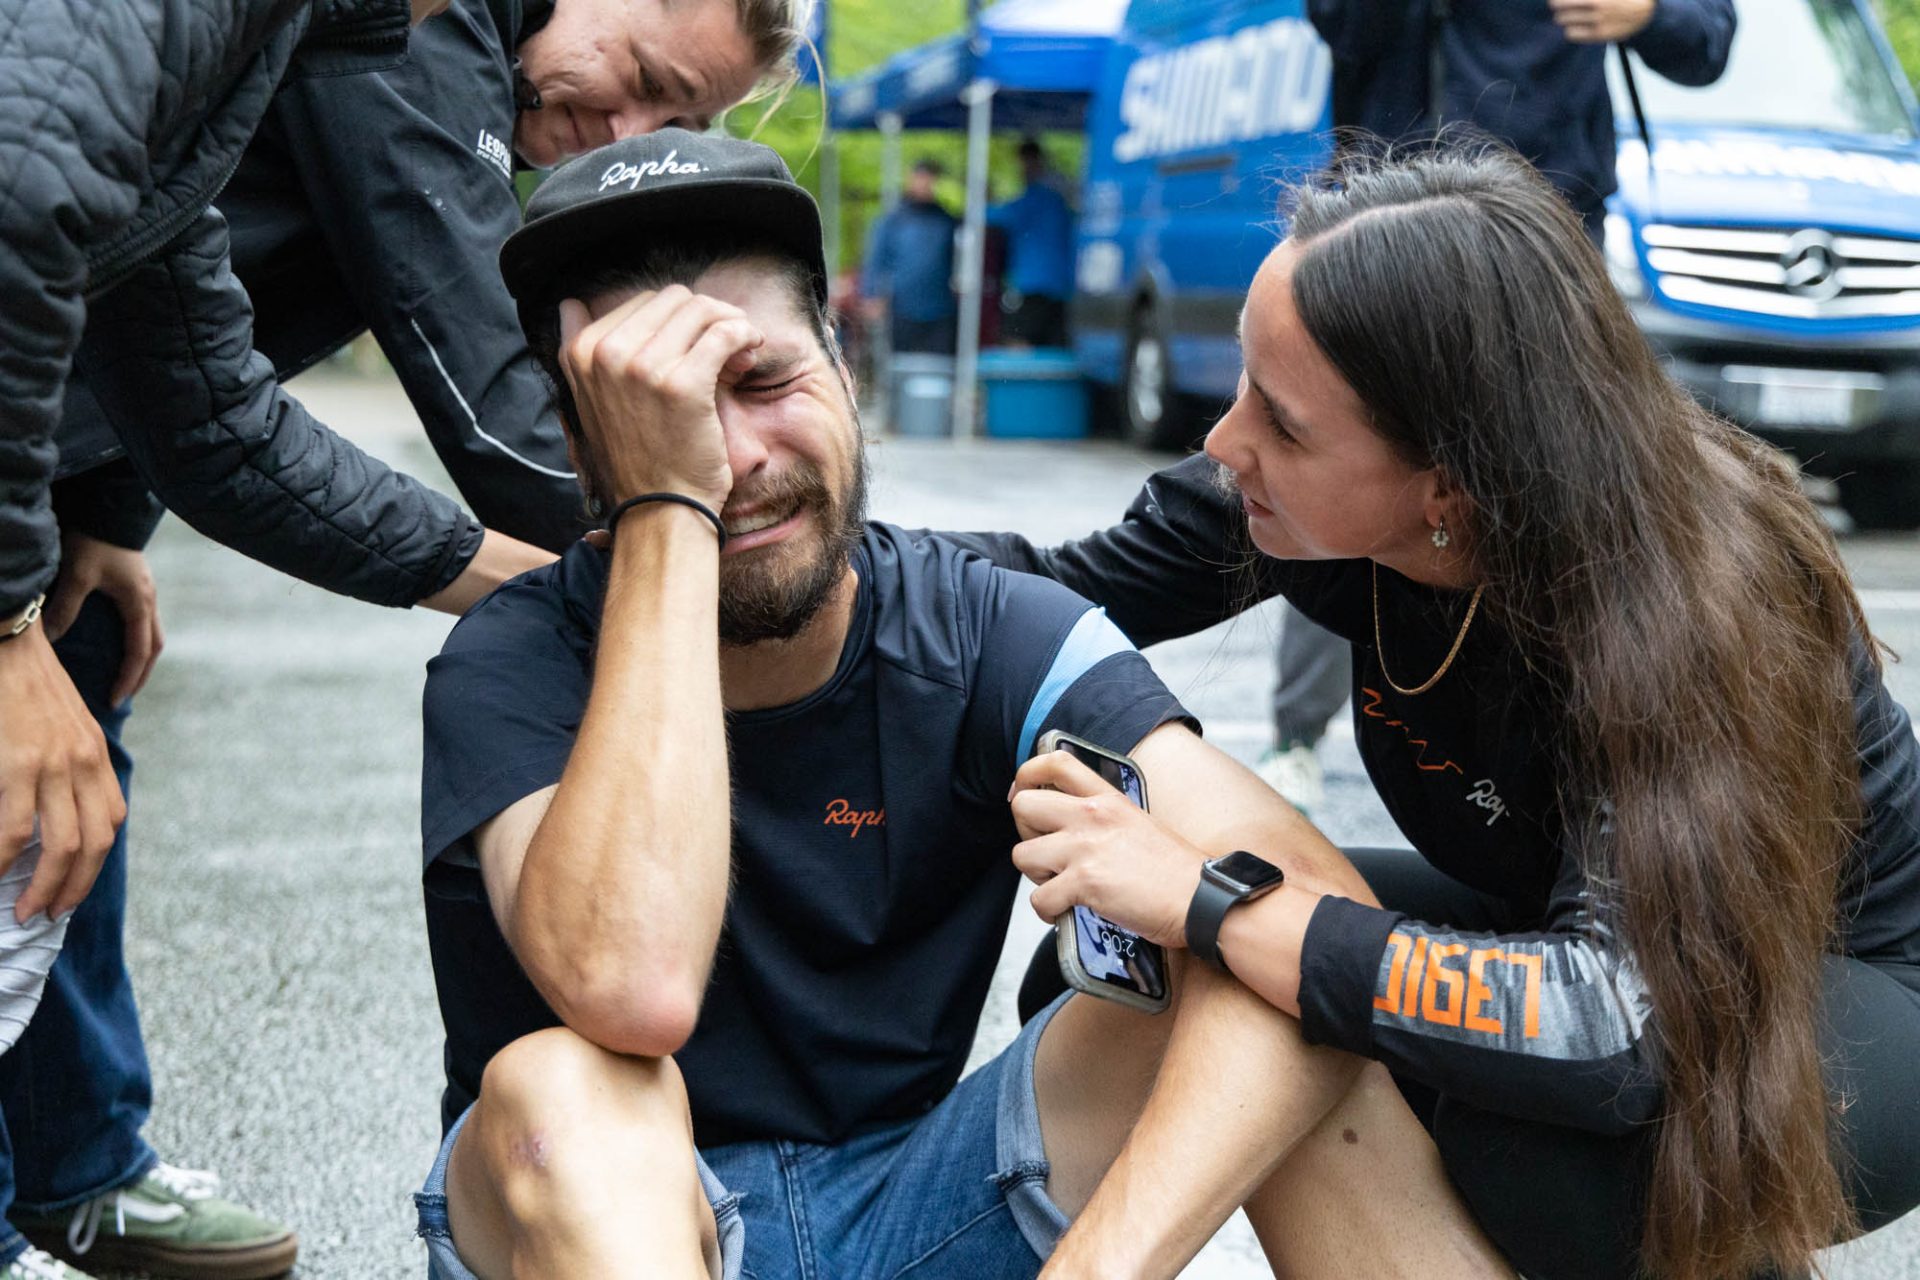 Sam Boardman sits on the pavement and briefly cries after winning stage 4 of the Joe Martin Stage Race. It's well after the stage, and he's dressed in street clothes - jean shorts, a Rapha t-shirt and cap, and he has one hand to his face with his eyes closed as he's overcome with emotion.